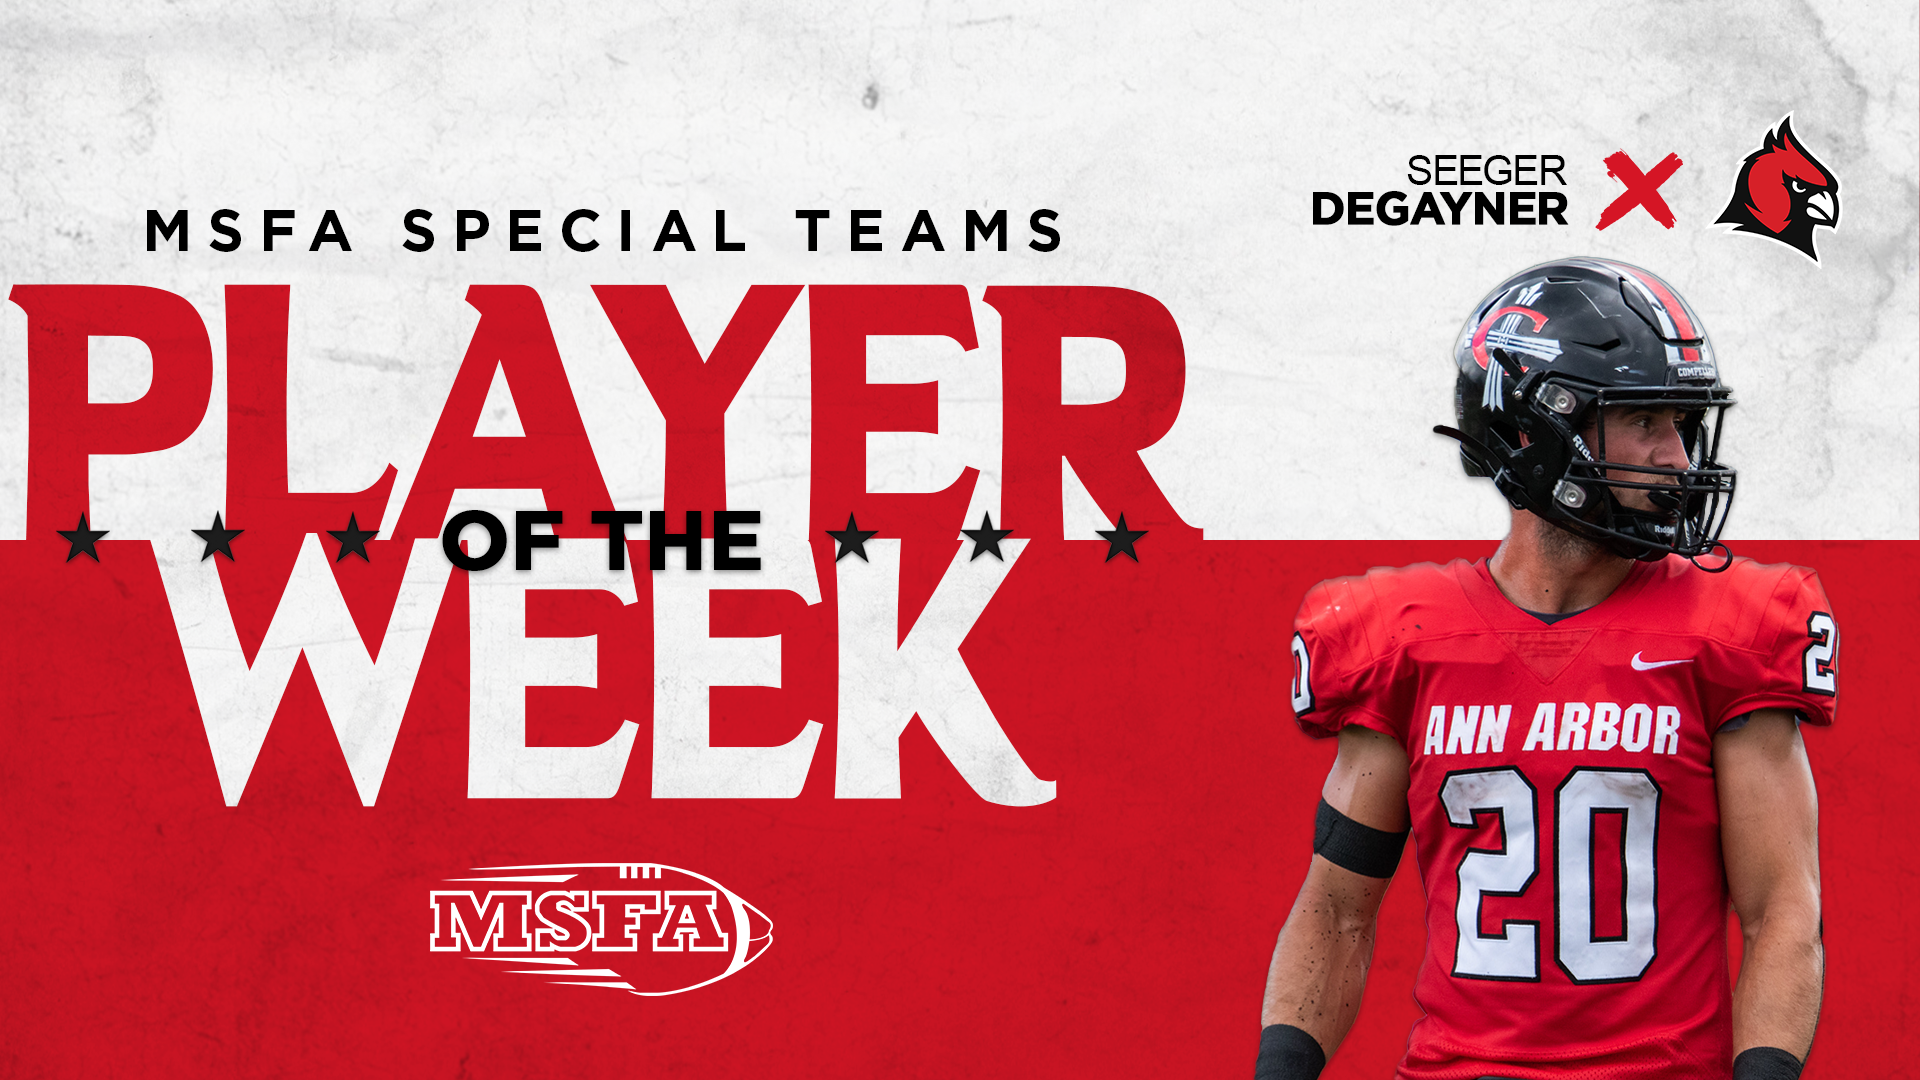 Football's Seeger DeGayner earns honors from MSFA and NCCAA